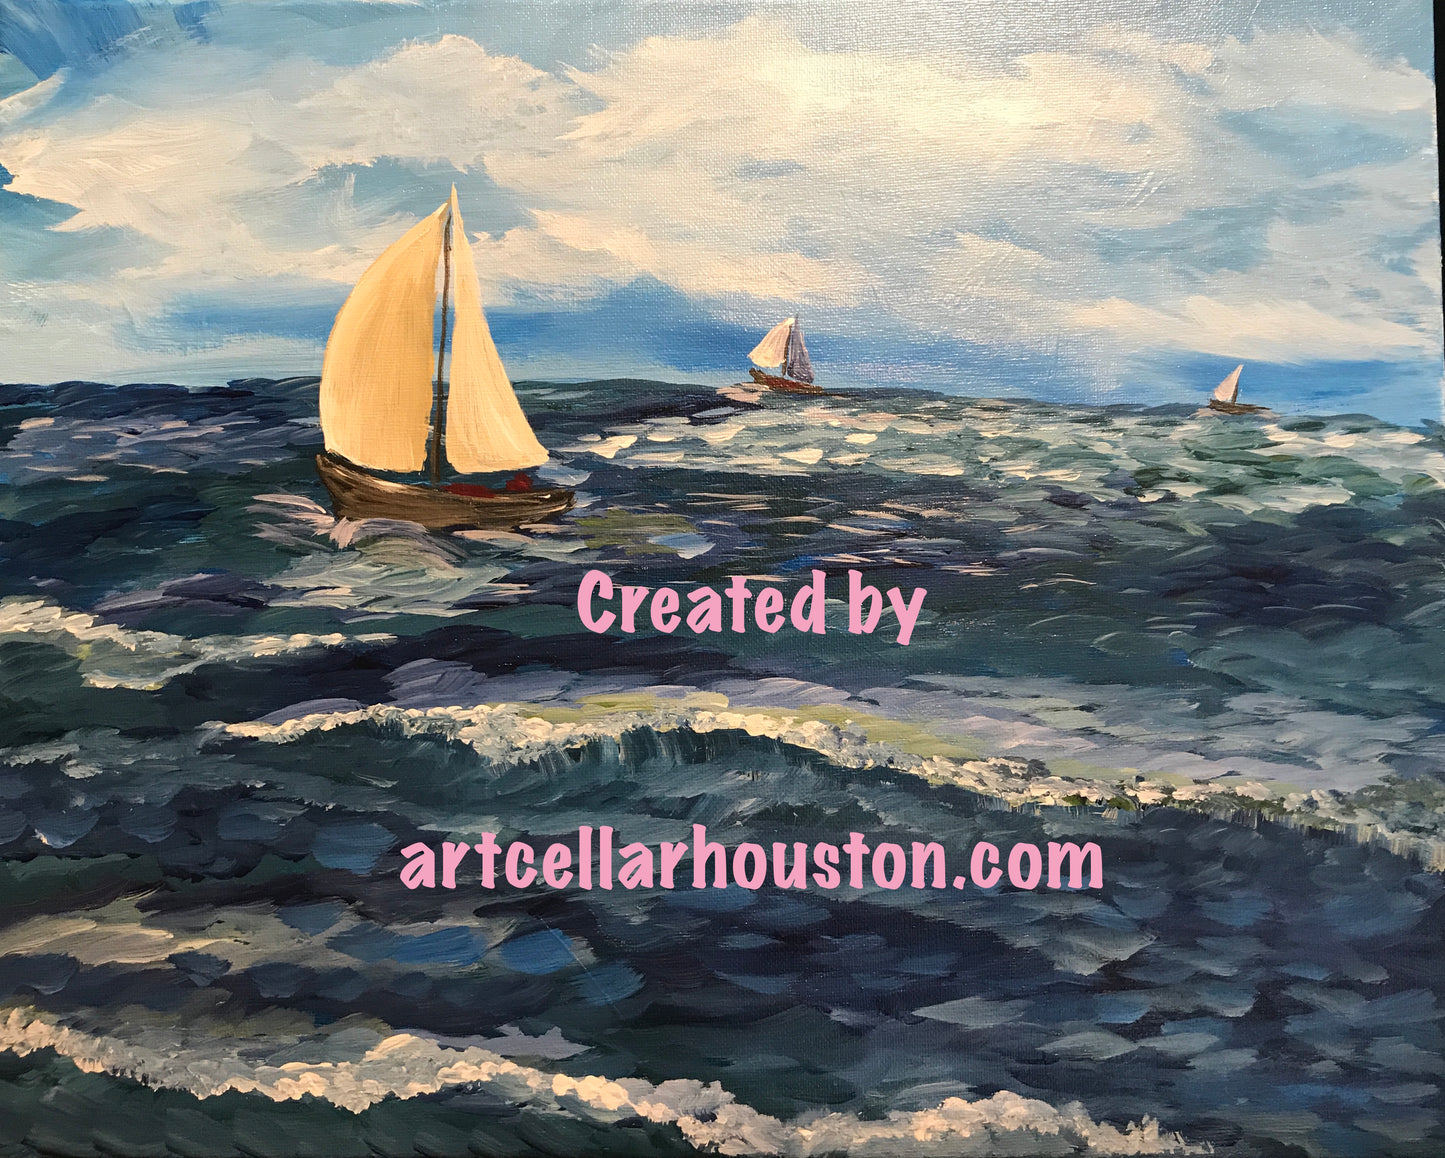 Thu, Jul 21st, 7-10P “To The Lighthouse” Private Wine and Painting Party Guest